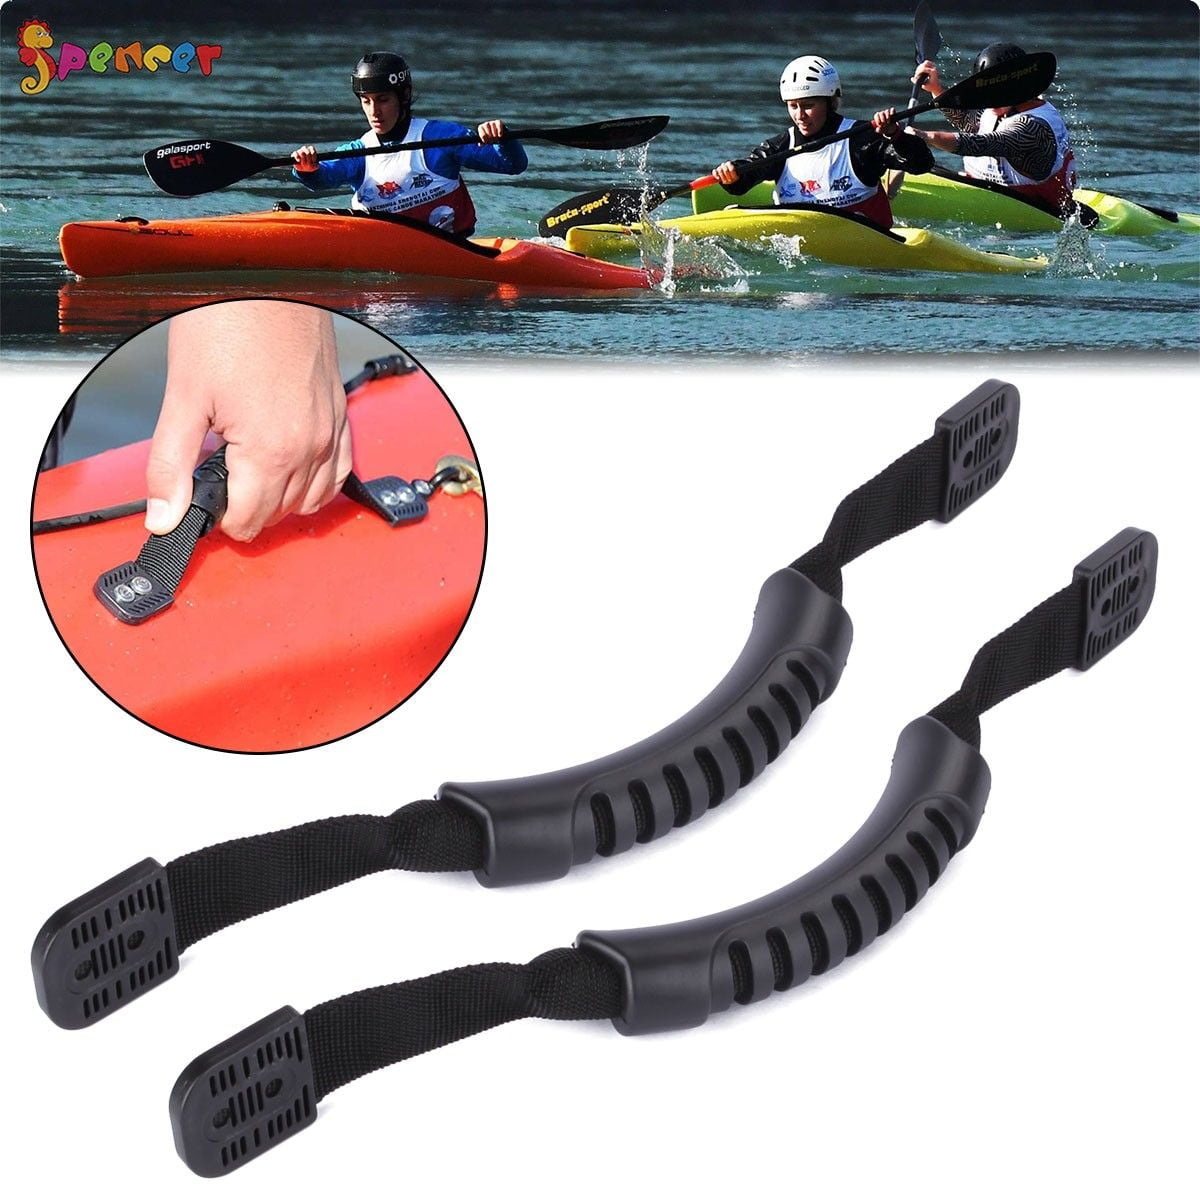 Deluxe Carry Handle side mounting Kayak Replacement Accessories Marine Black